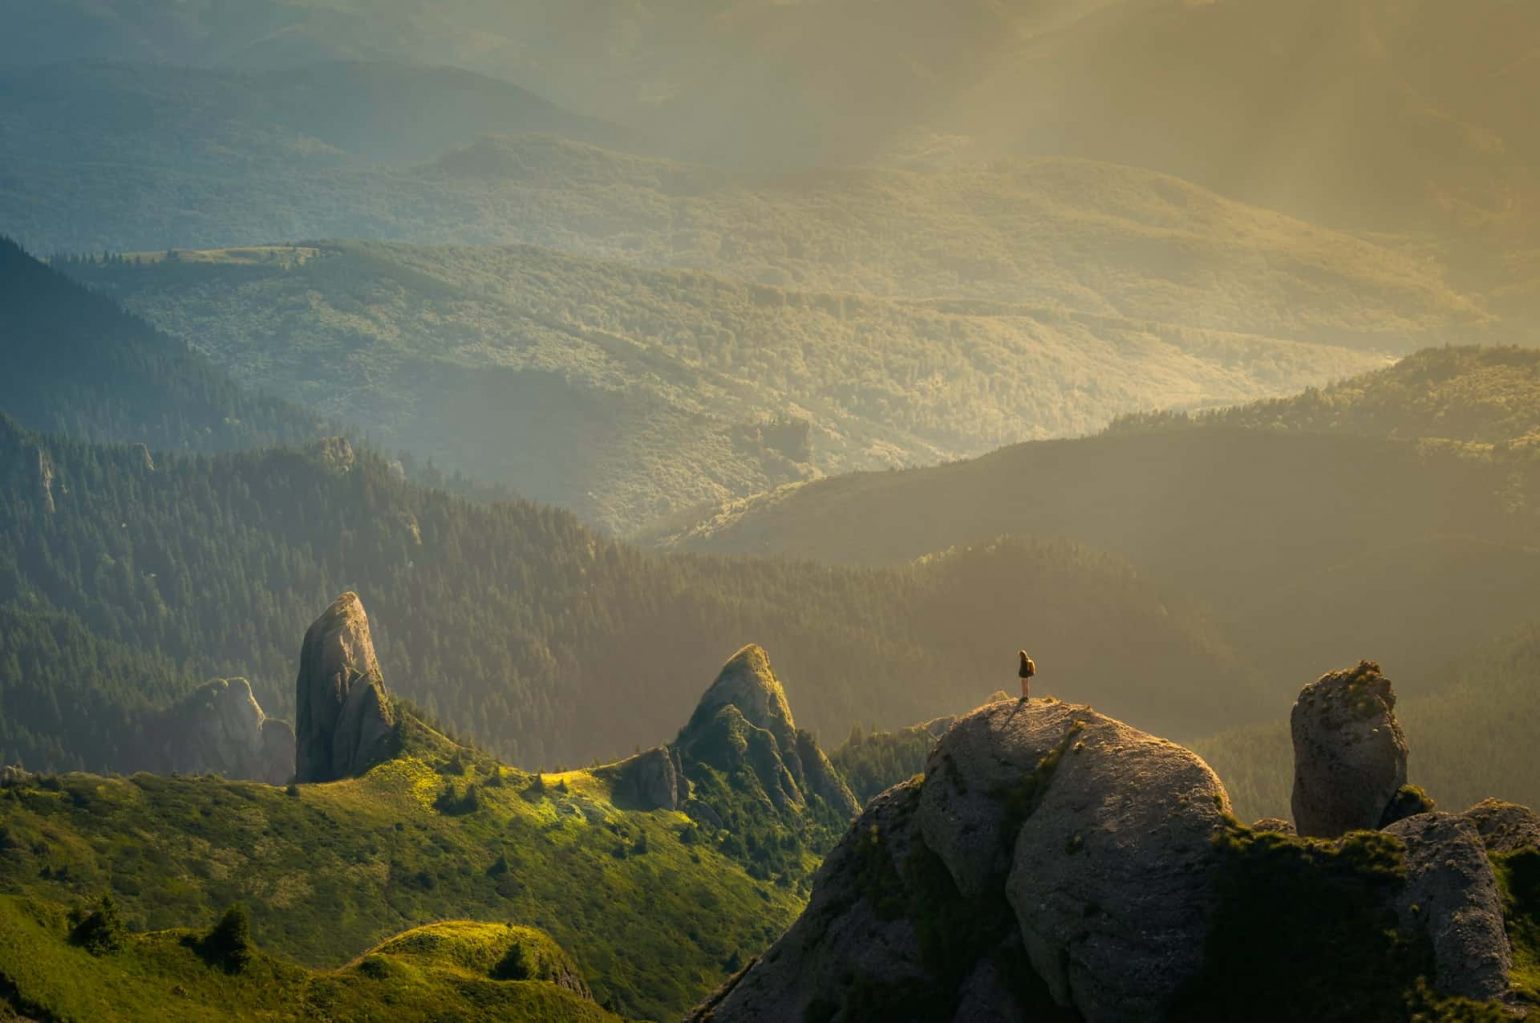 An image of a singluar person in the distance on a outcropping in a vast mountain wilderness